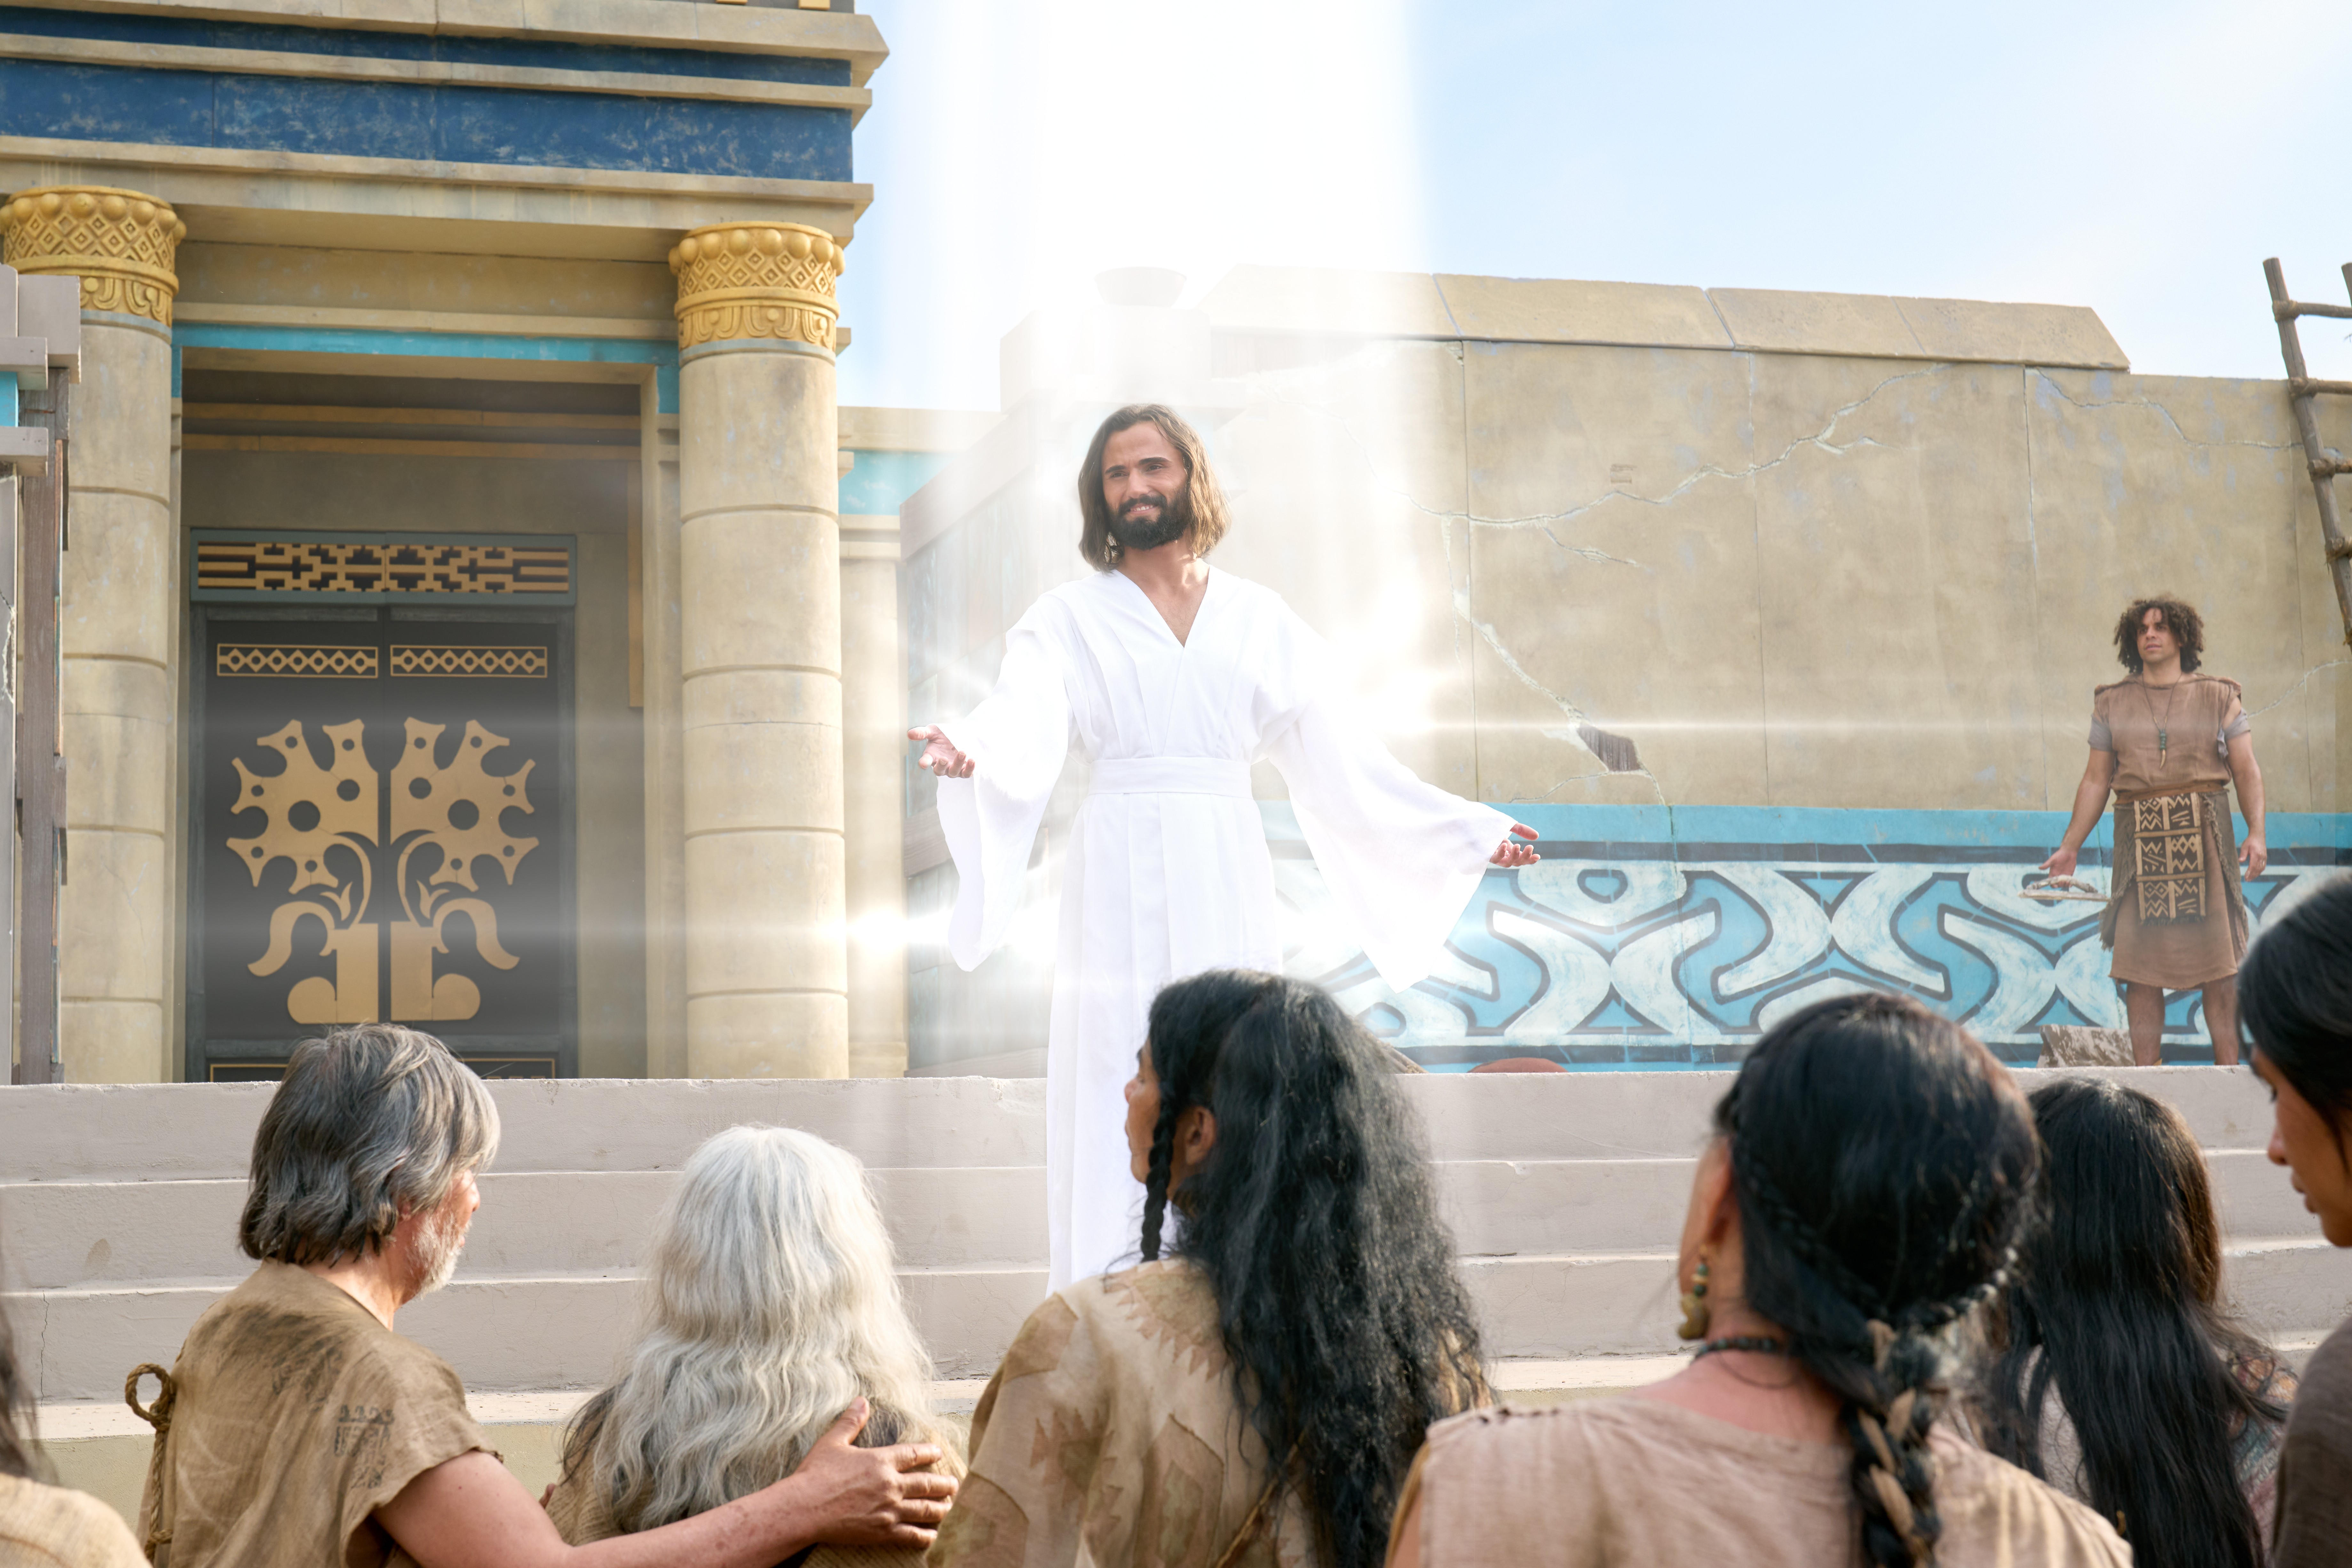 Jesus Christ descends from Heaven in a beam of light in front of a temple in Land Bountiful.